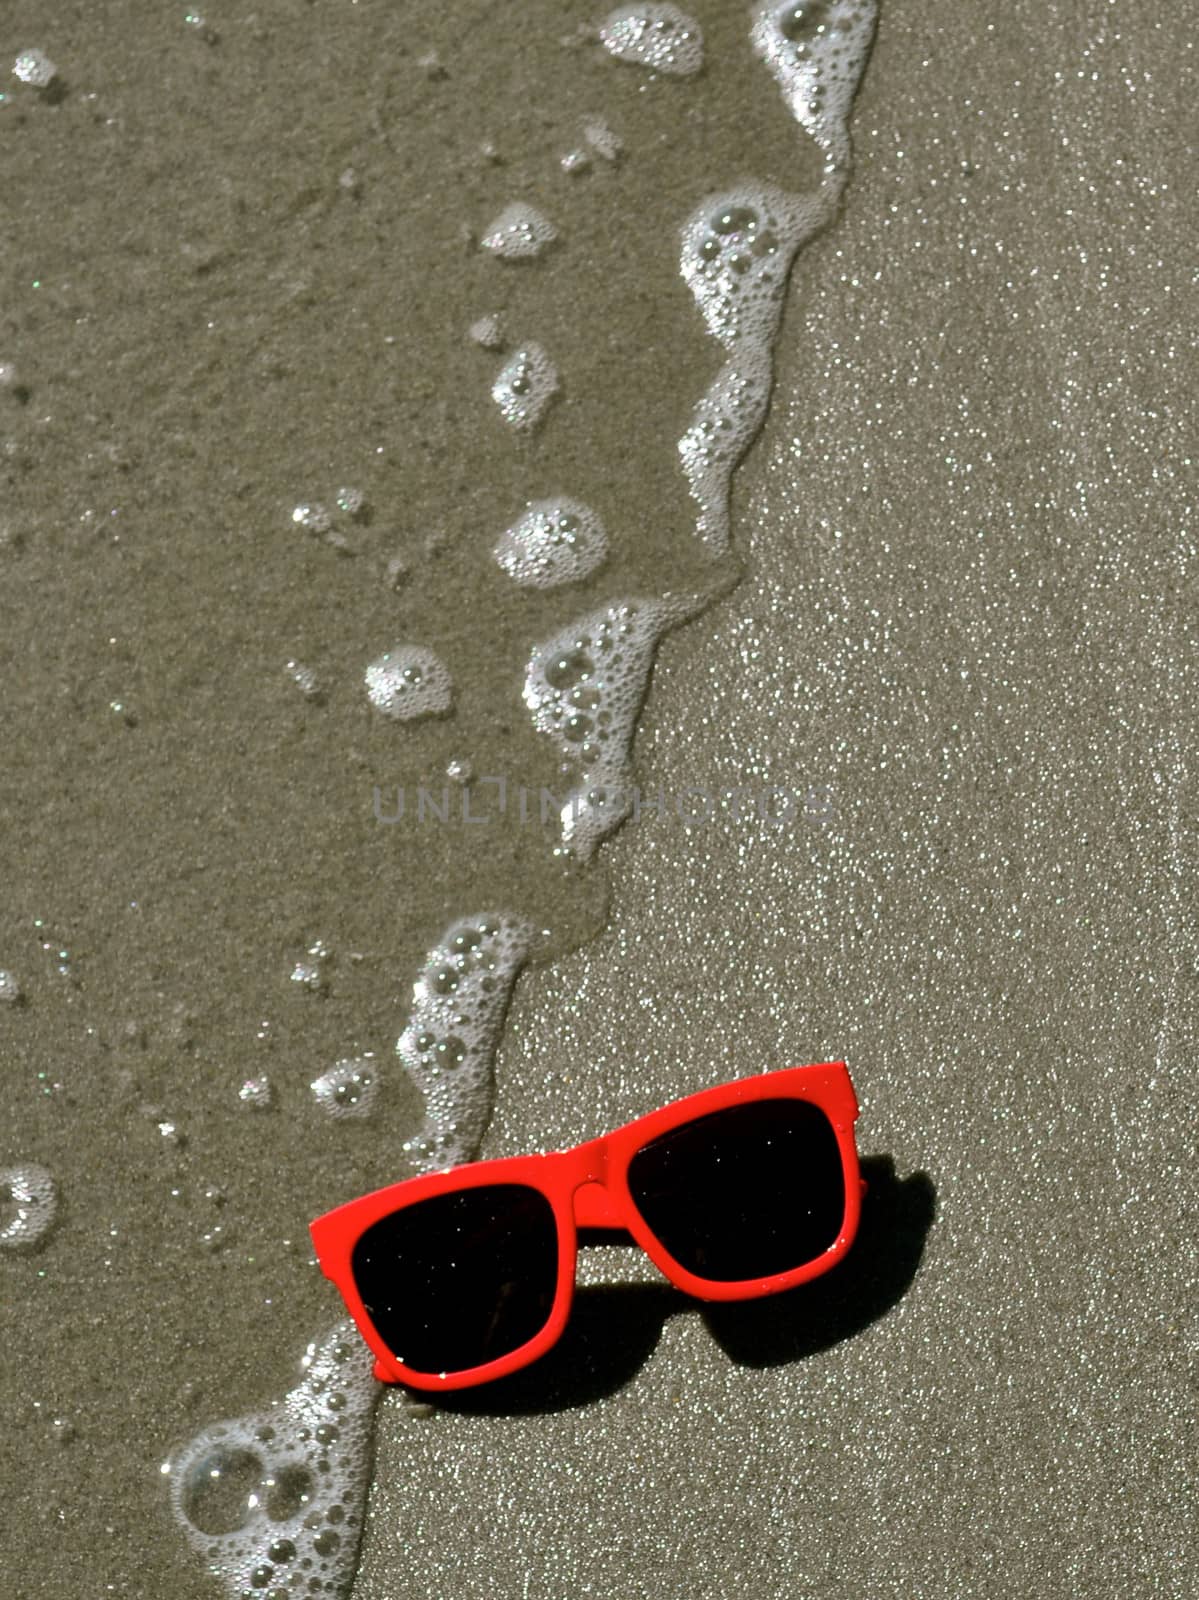 In the Sand - Sunglasses 2 by RefocusPhoto